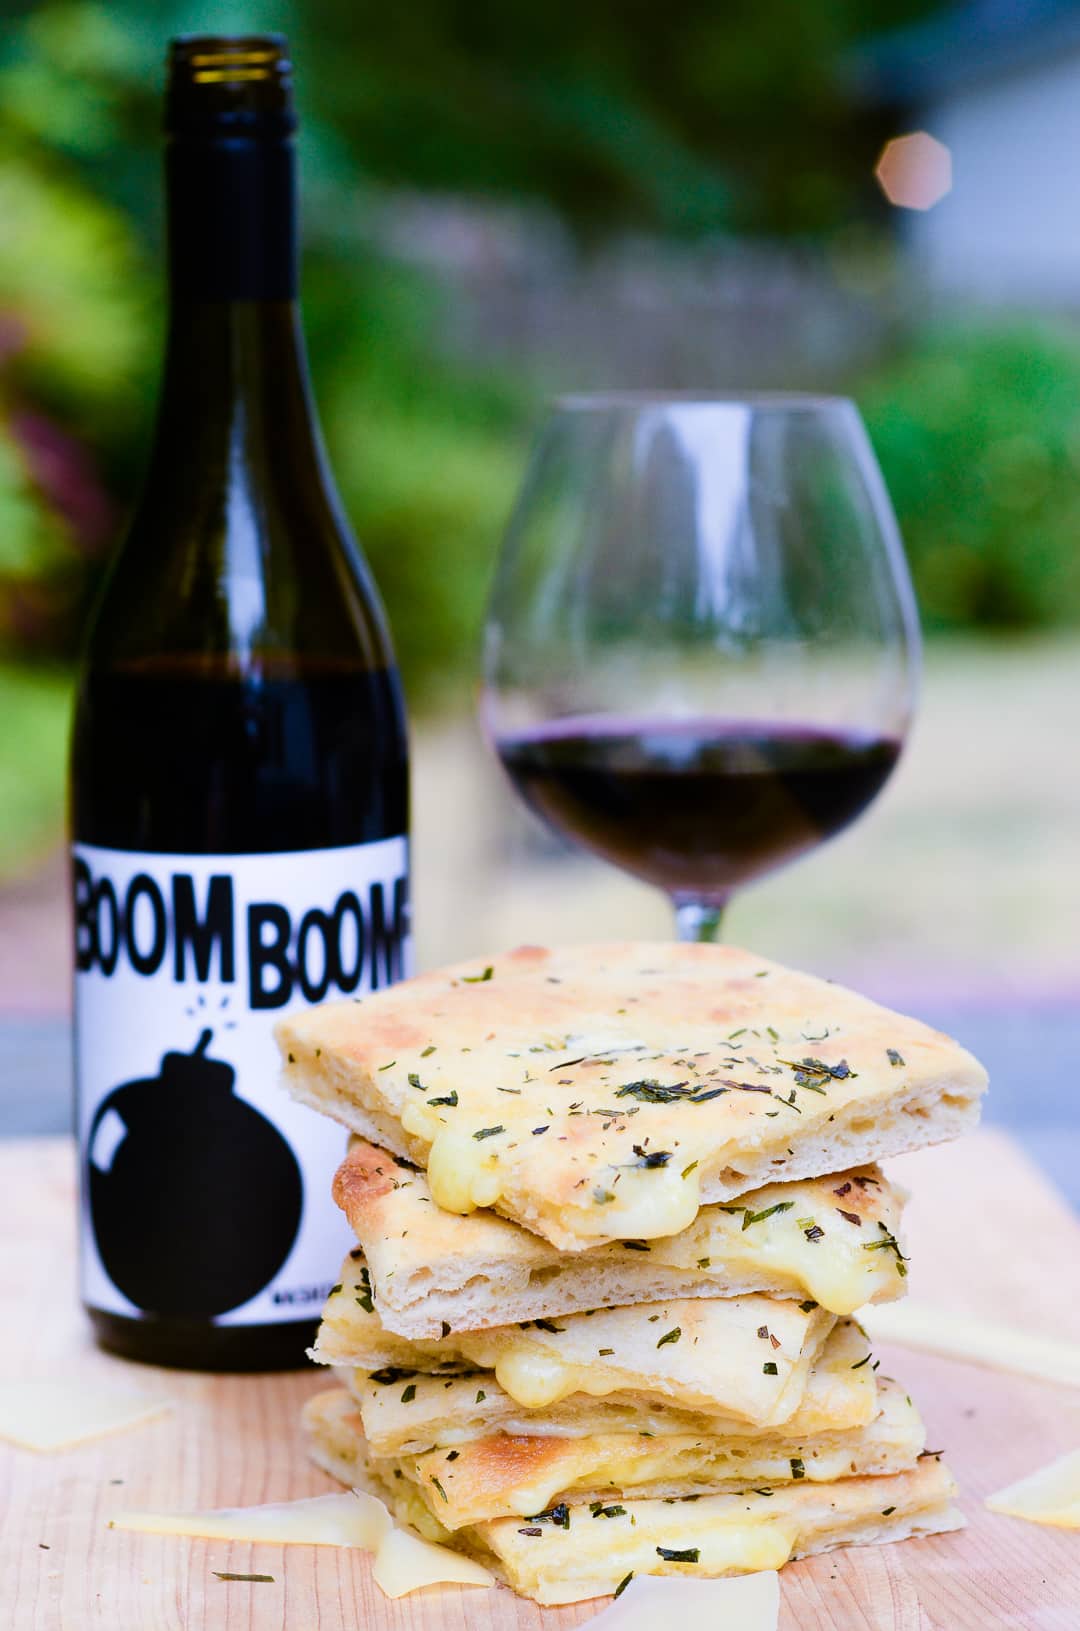 Boom Boom wine bottle and glass behind a stack of gourmet grilled cheese.